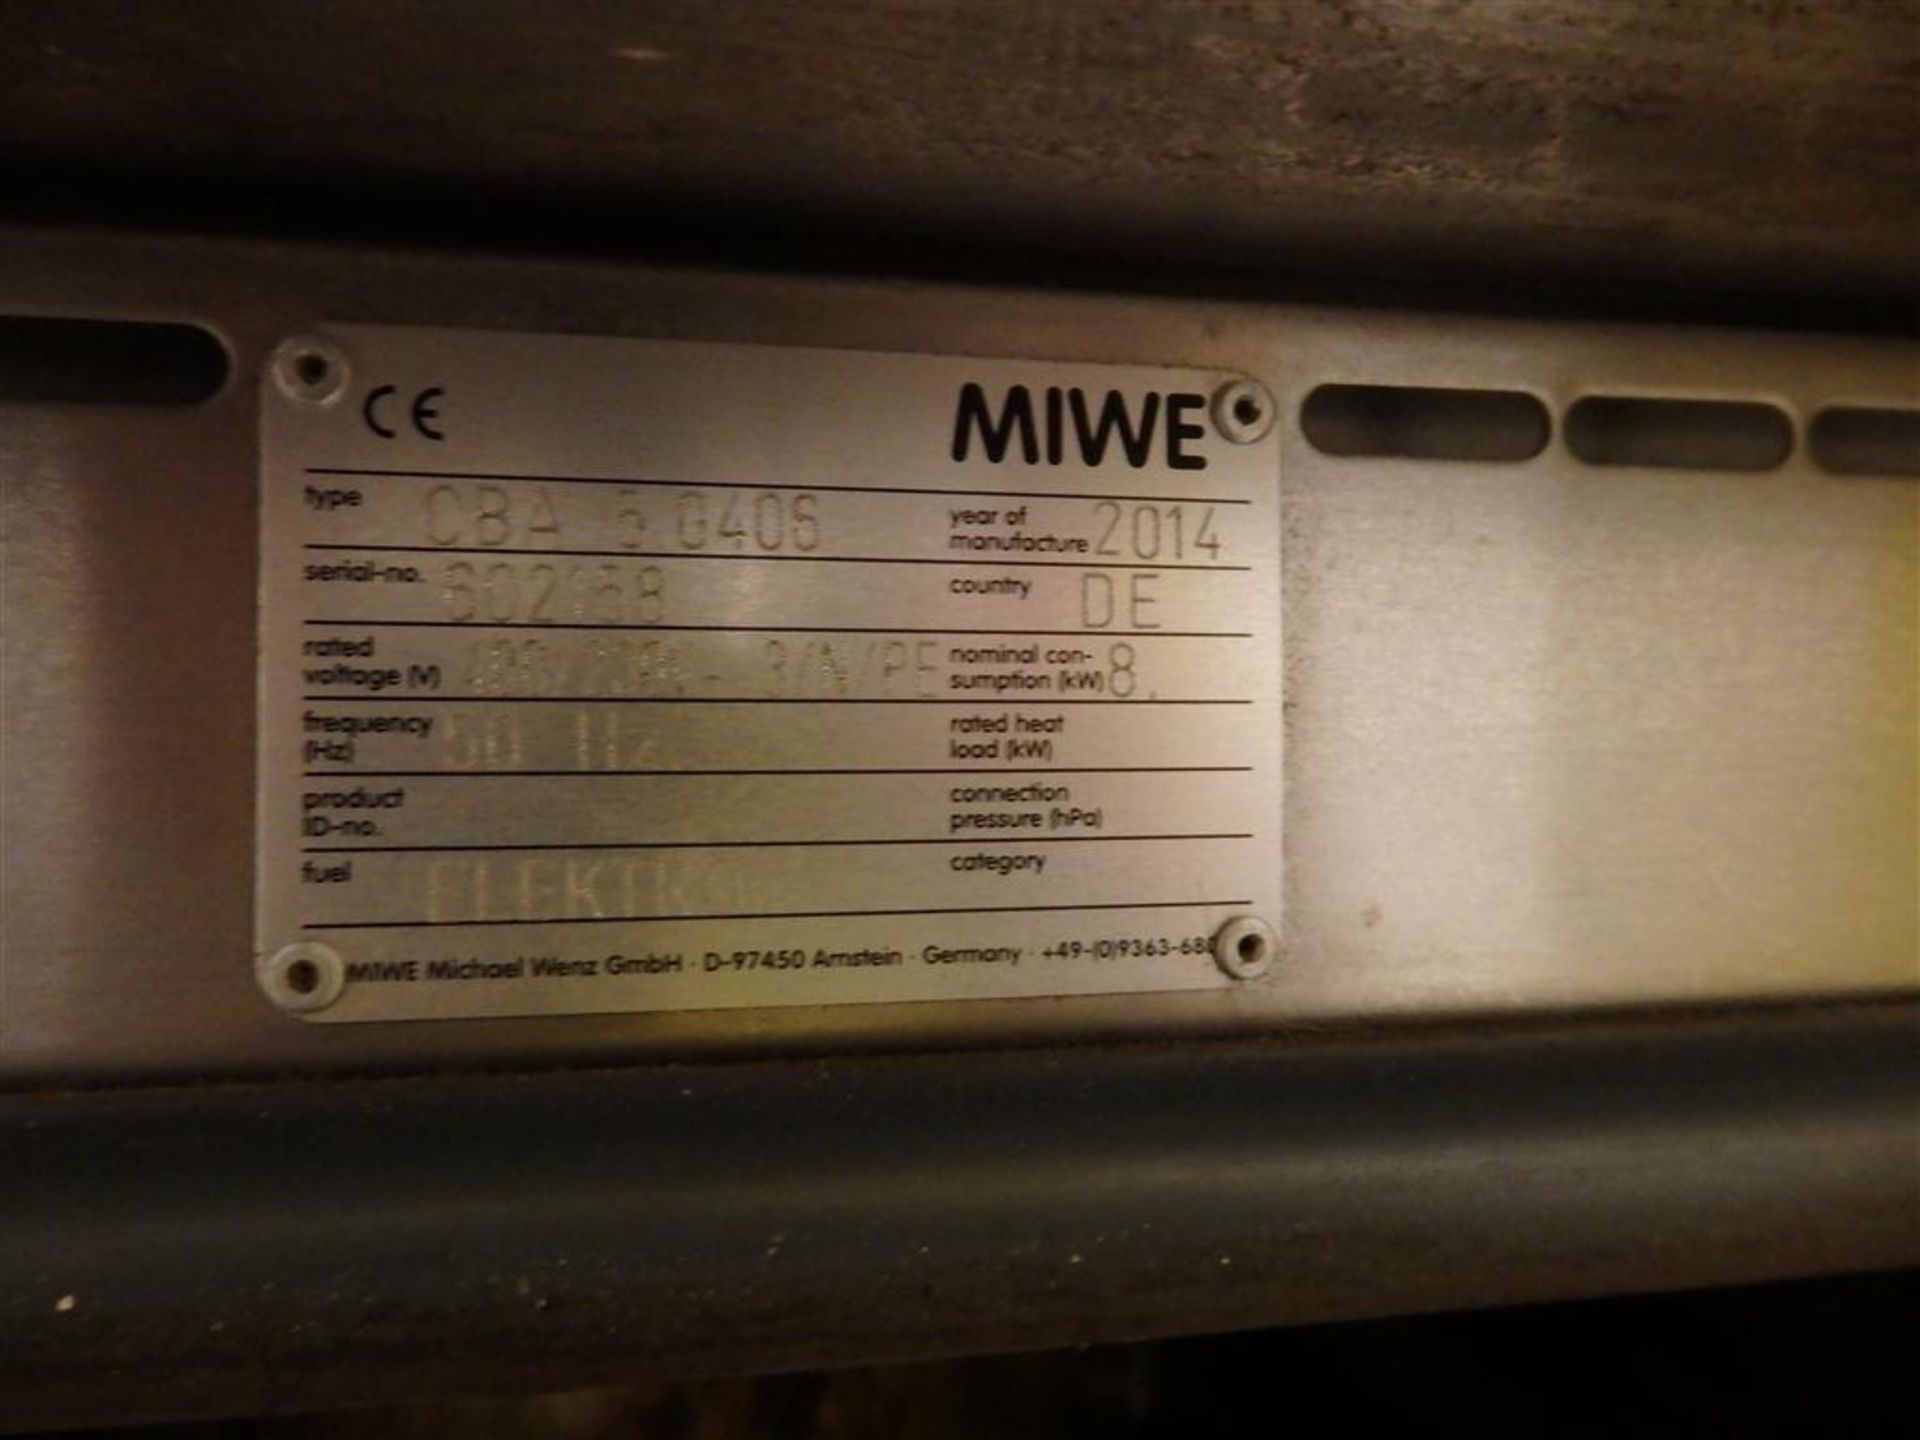 1 x MIWE Cube Air - Convection Baking Oven - 81cm x 82cm x height 83.5cm - Upmarket London - Image 5 of 10